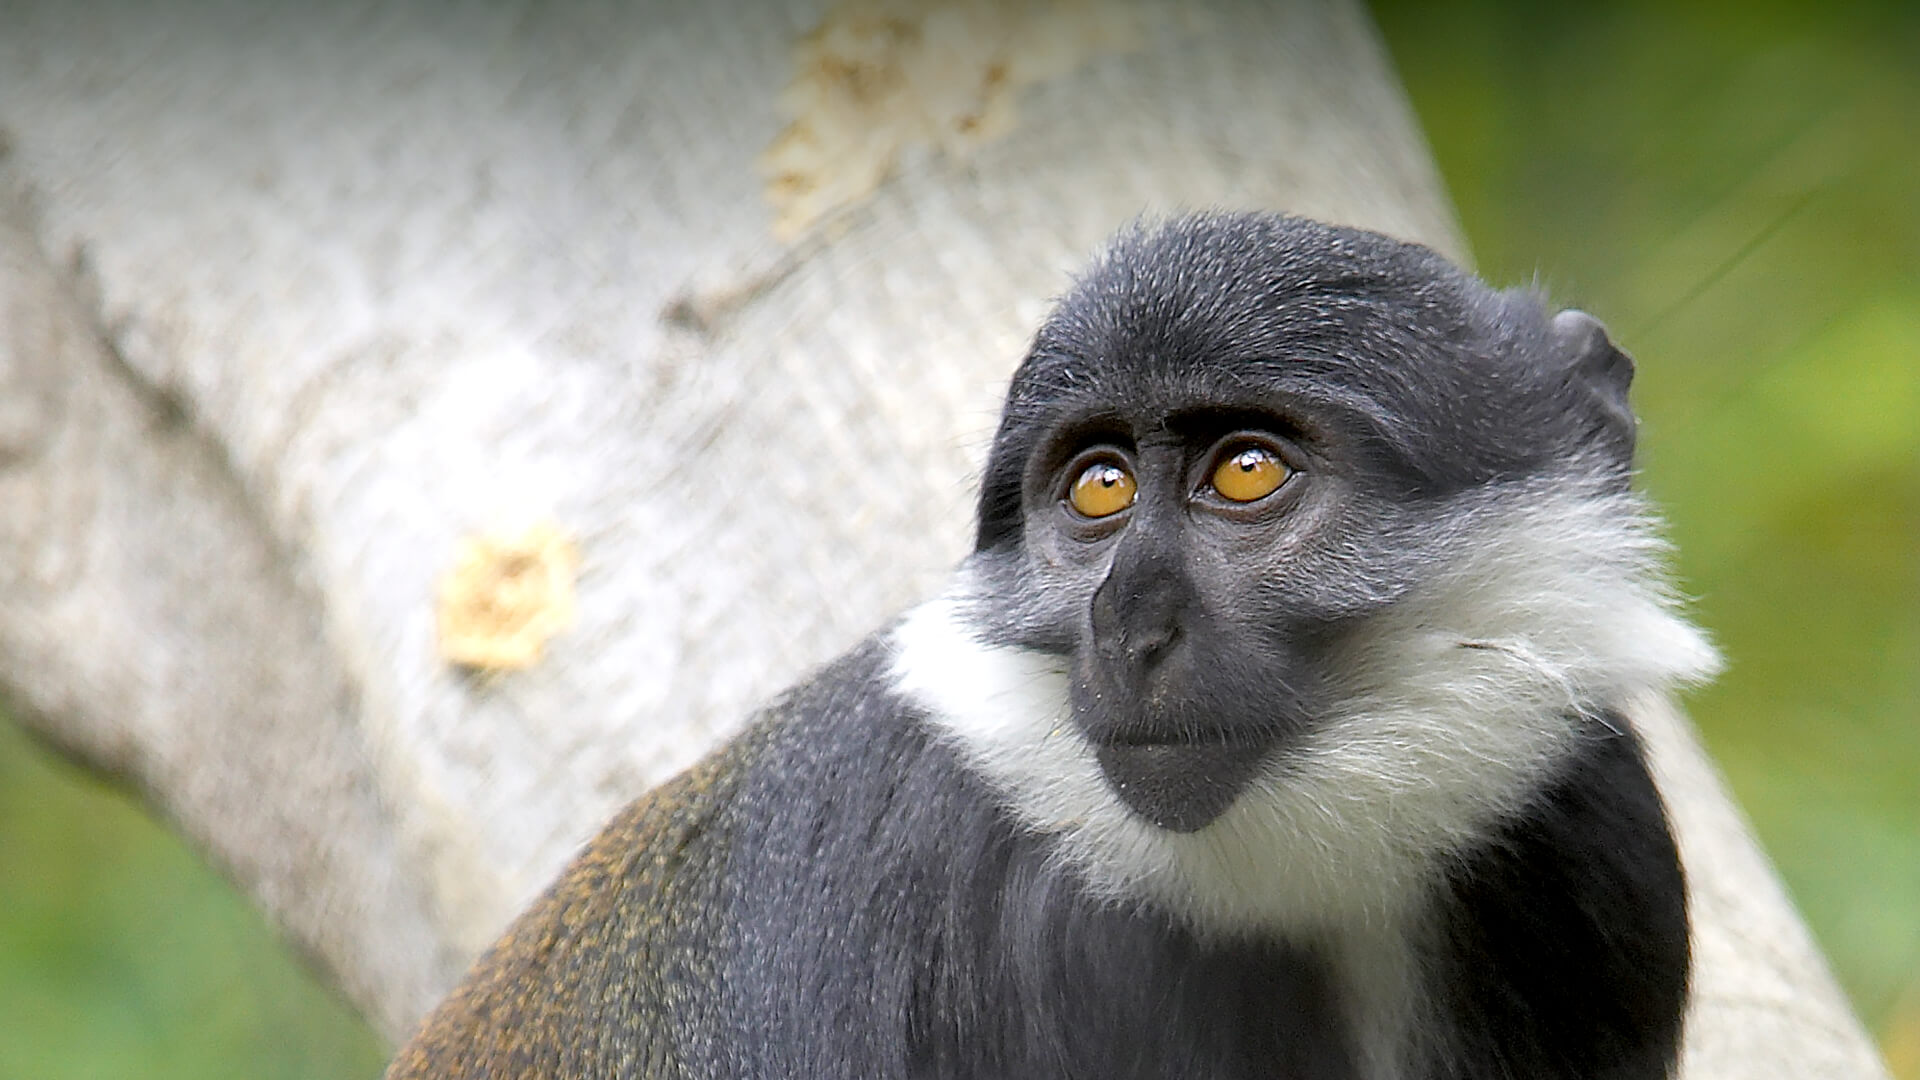 L'hoest guenon looking left and up